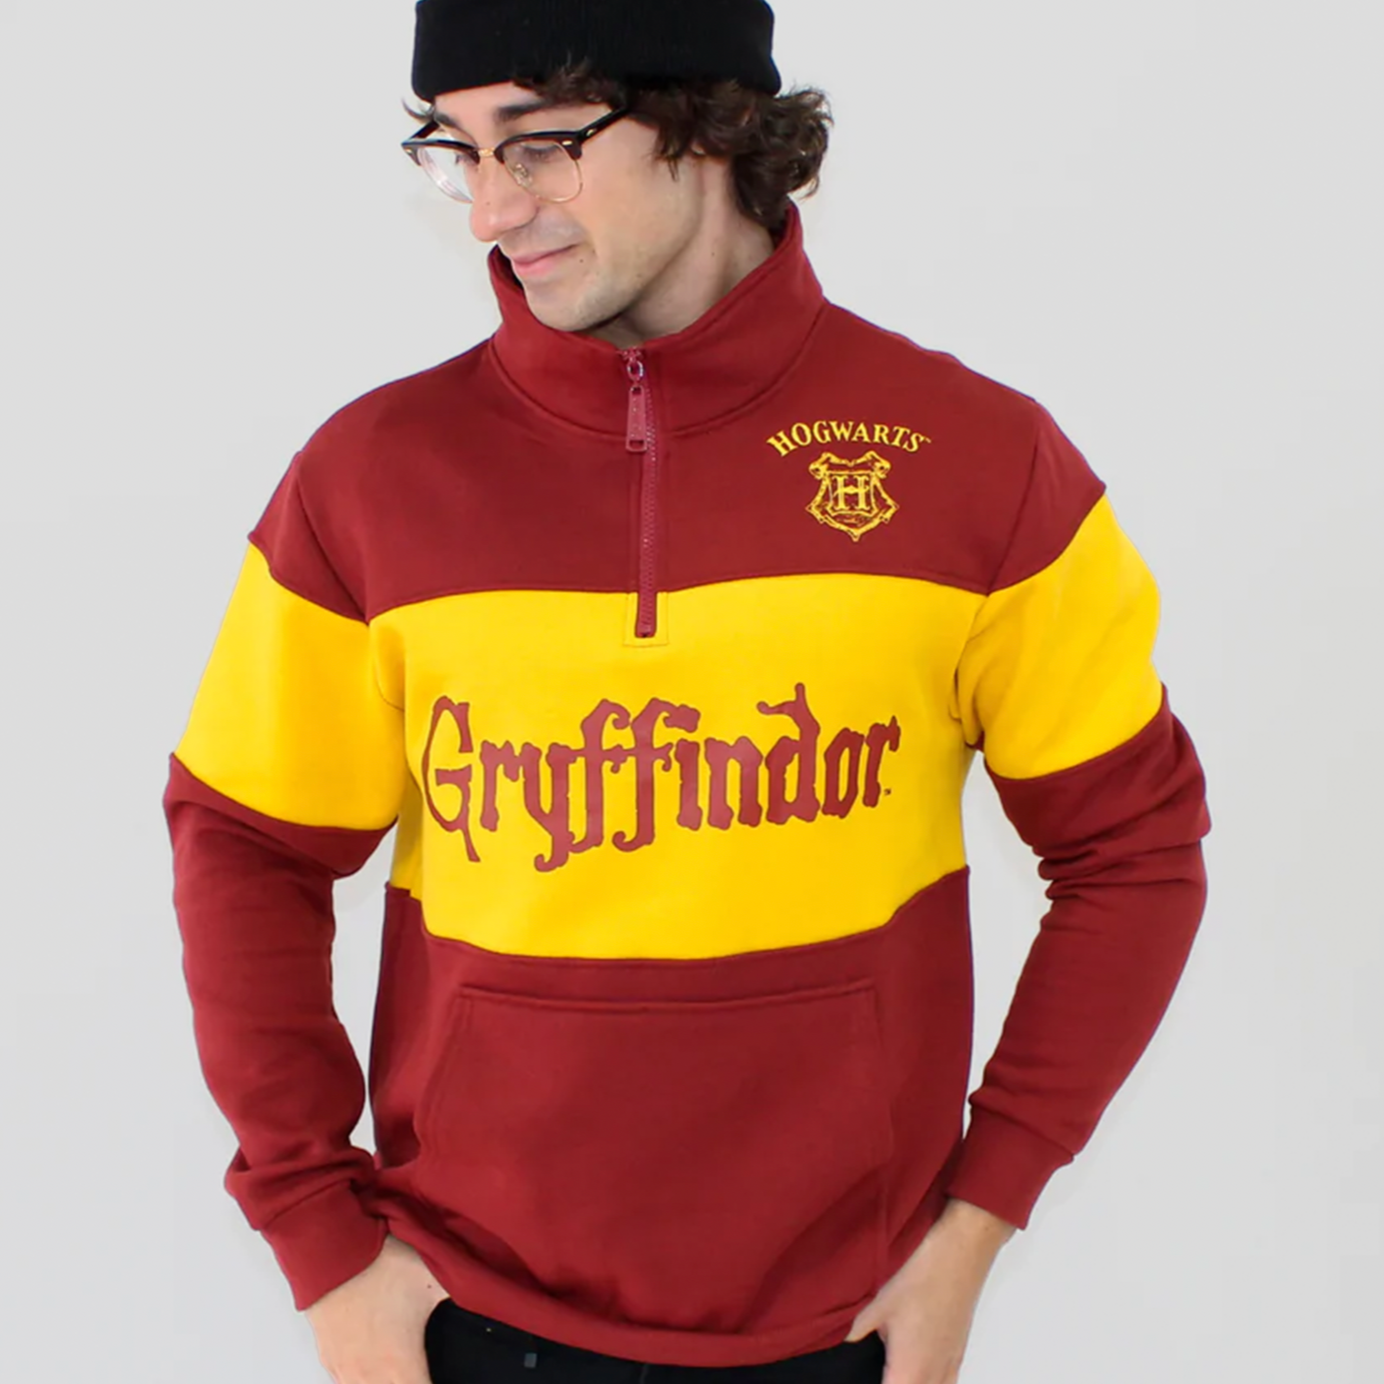 Gryffindor (Harry Potter) Pullover Sweater by Cakeworthy